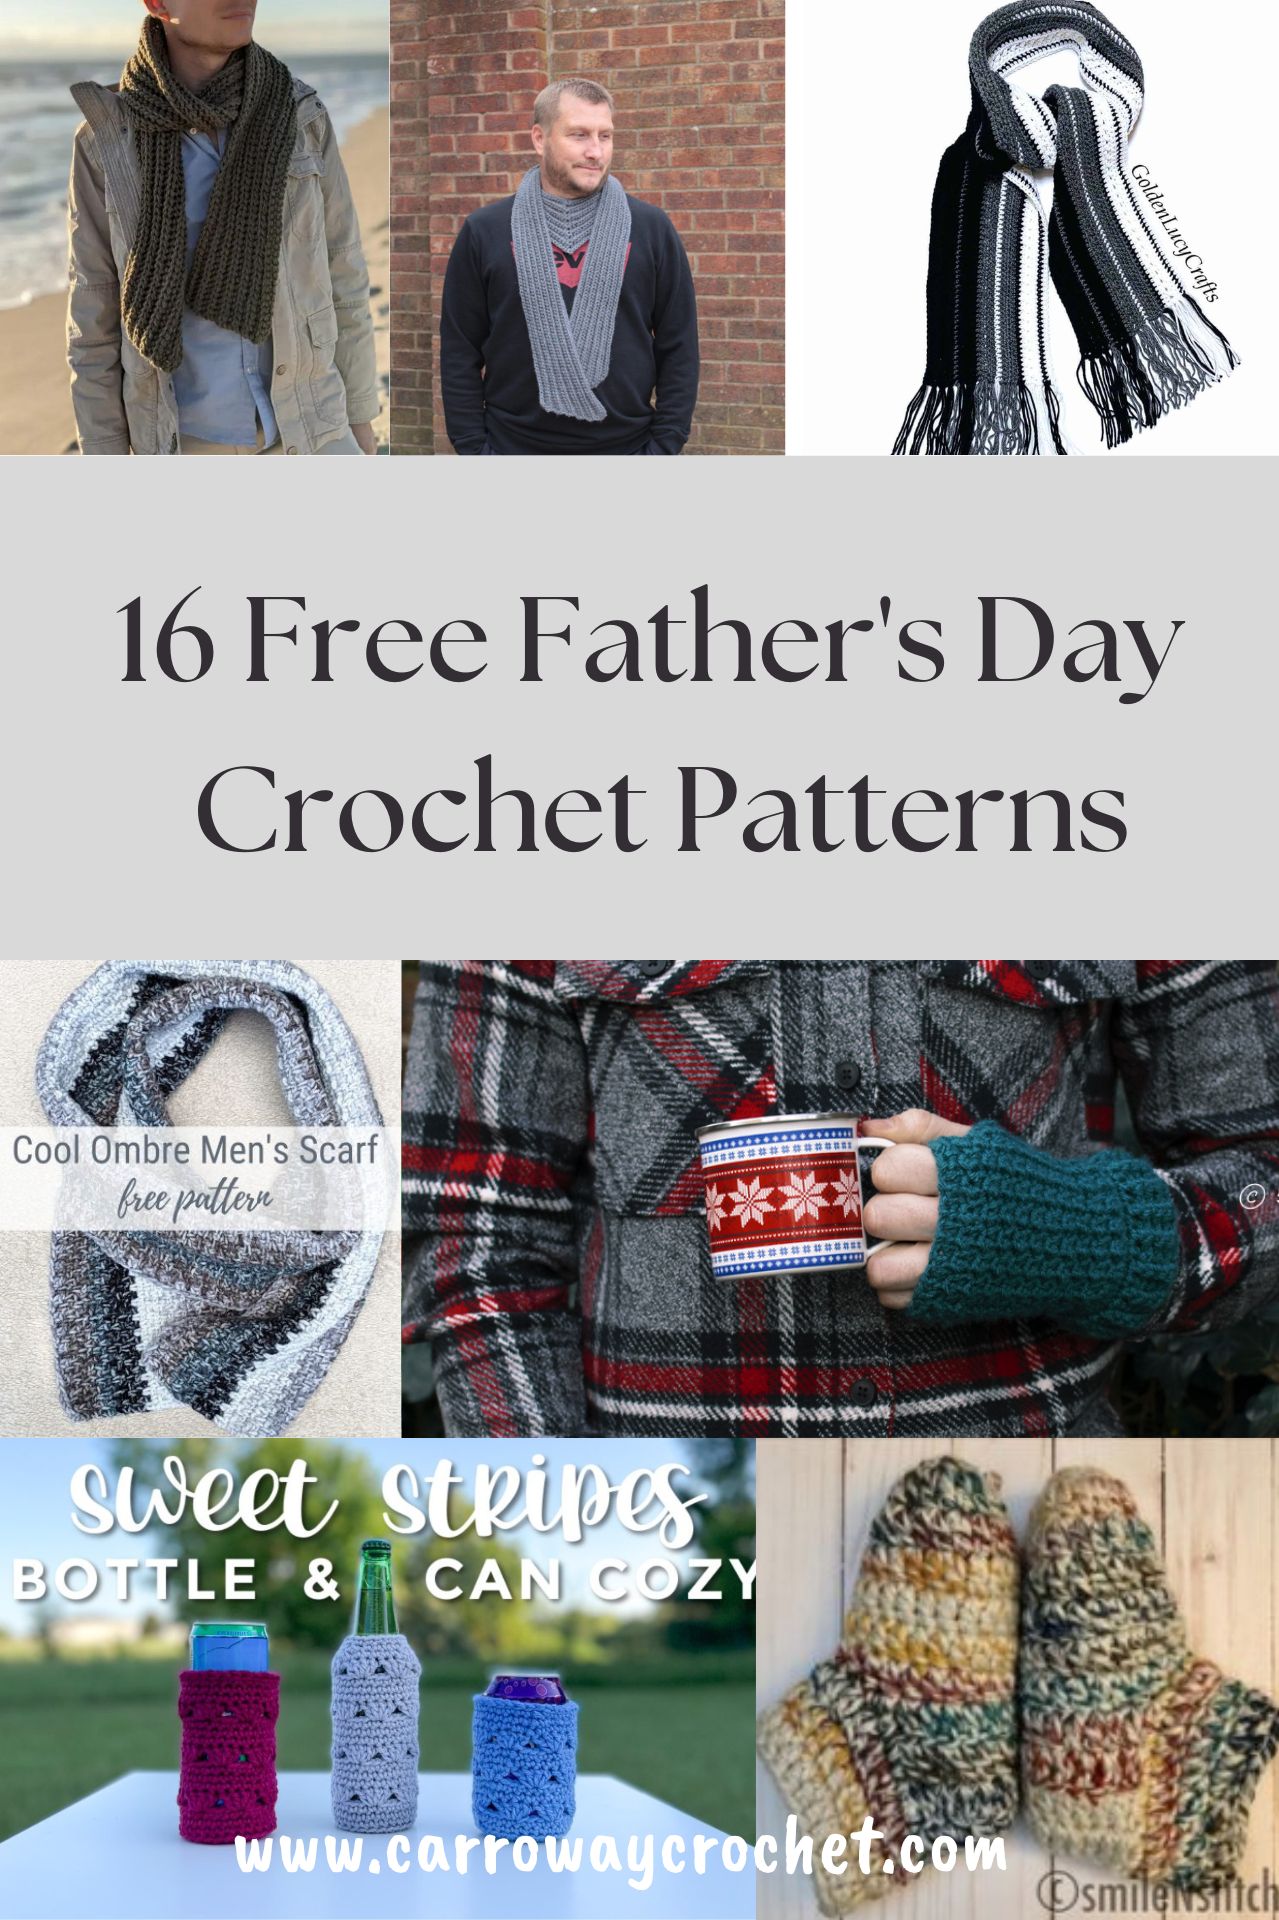 Free Pattern Round-Up: Father's Day Crochet Projects - YARNutopia & More  YARNutopia & More